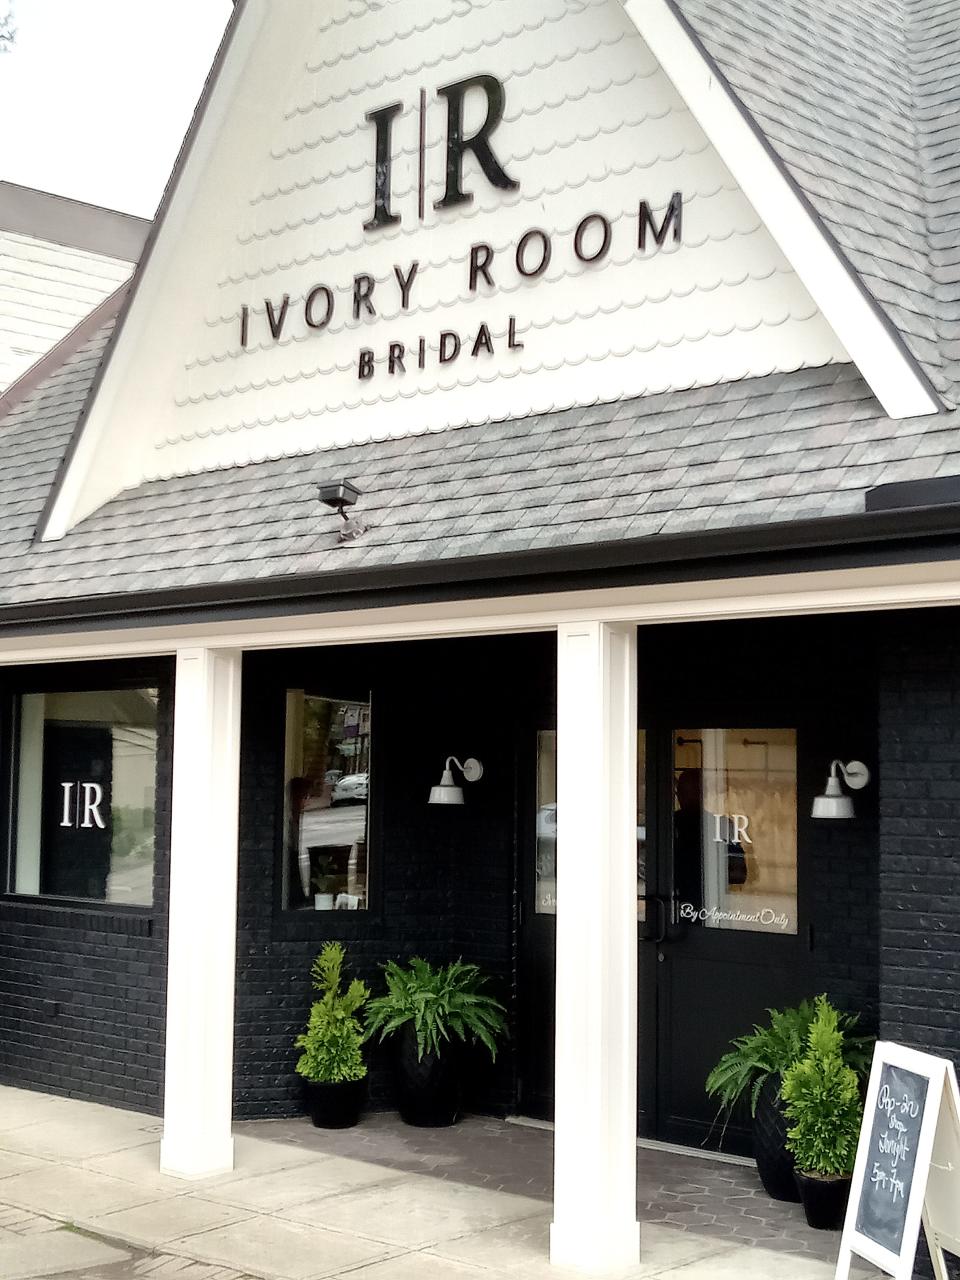 The Ivory Room expanded in February, and owner Carrolyn Salazar hosted a Pop-in Shop Expansion Celebration on Wednesday, May 15.